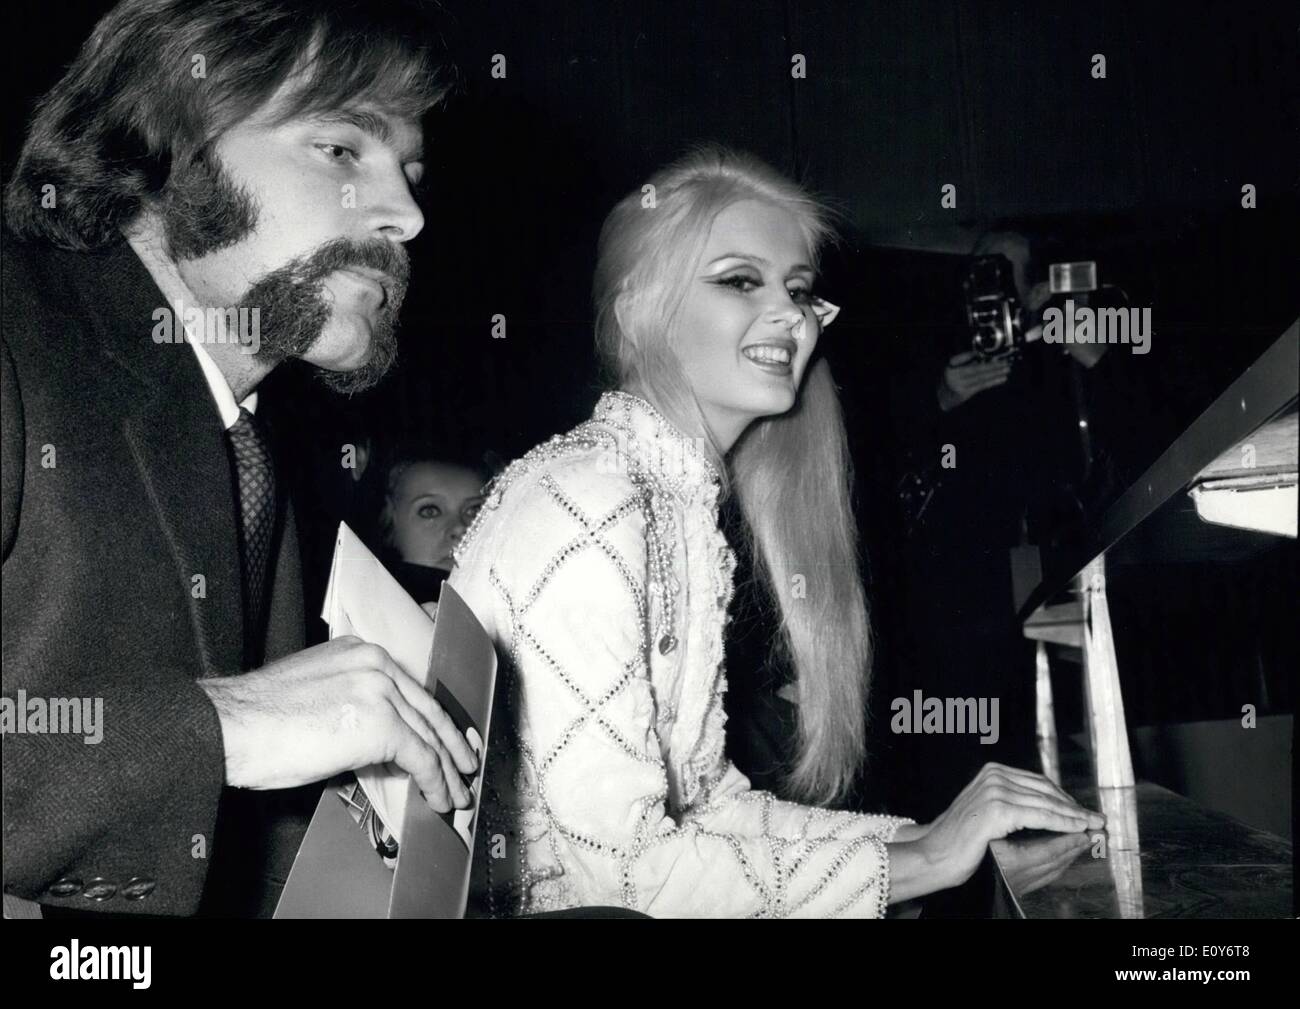 Dec. 12, 1968 - Gala performance at the Cinema Royal for the film ''2001, Space Odyssey''. Many stars attended at the gala. Photo shows American actress Pamela Tiffin and Franco Nero. Actor Franco Nero was the friend of the British actress Vanessa Redgrave. Is the Anglo-Italian love finished? Stock Photo